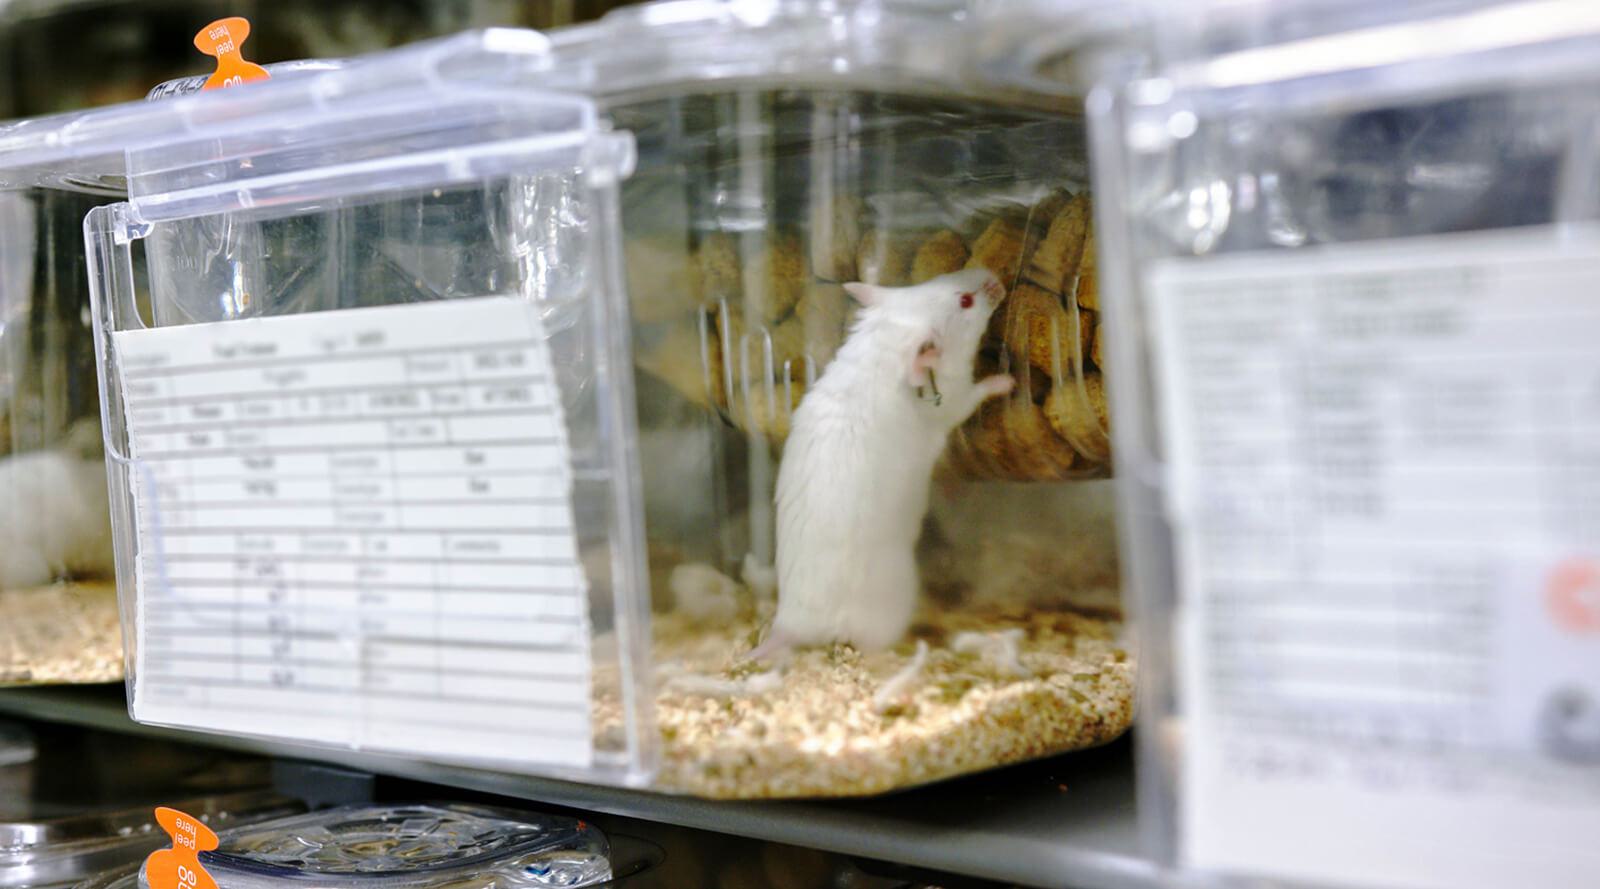 A white mouse in cage with bedding